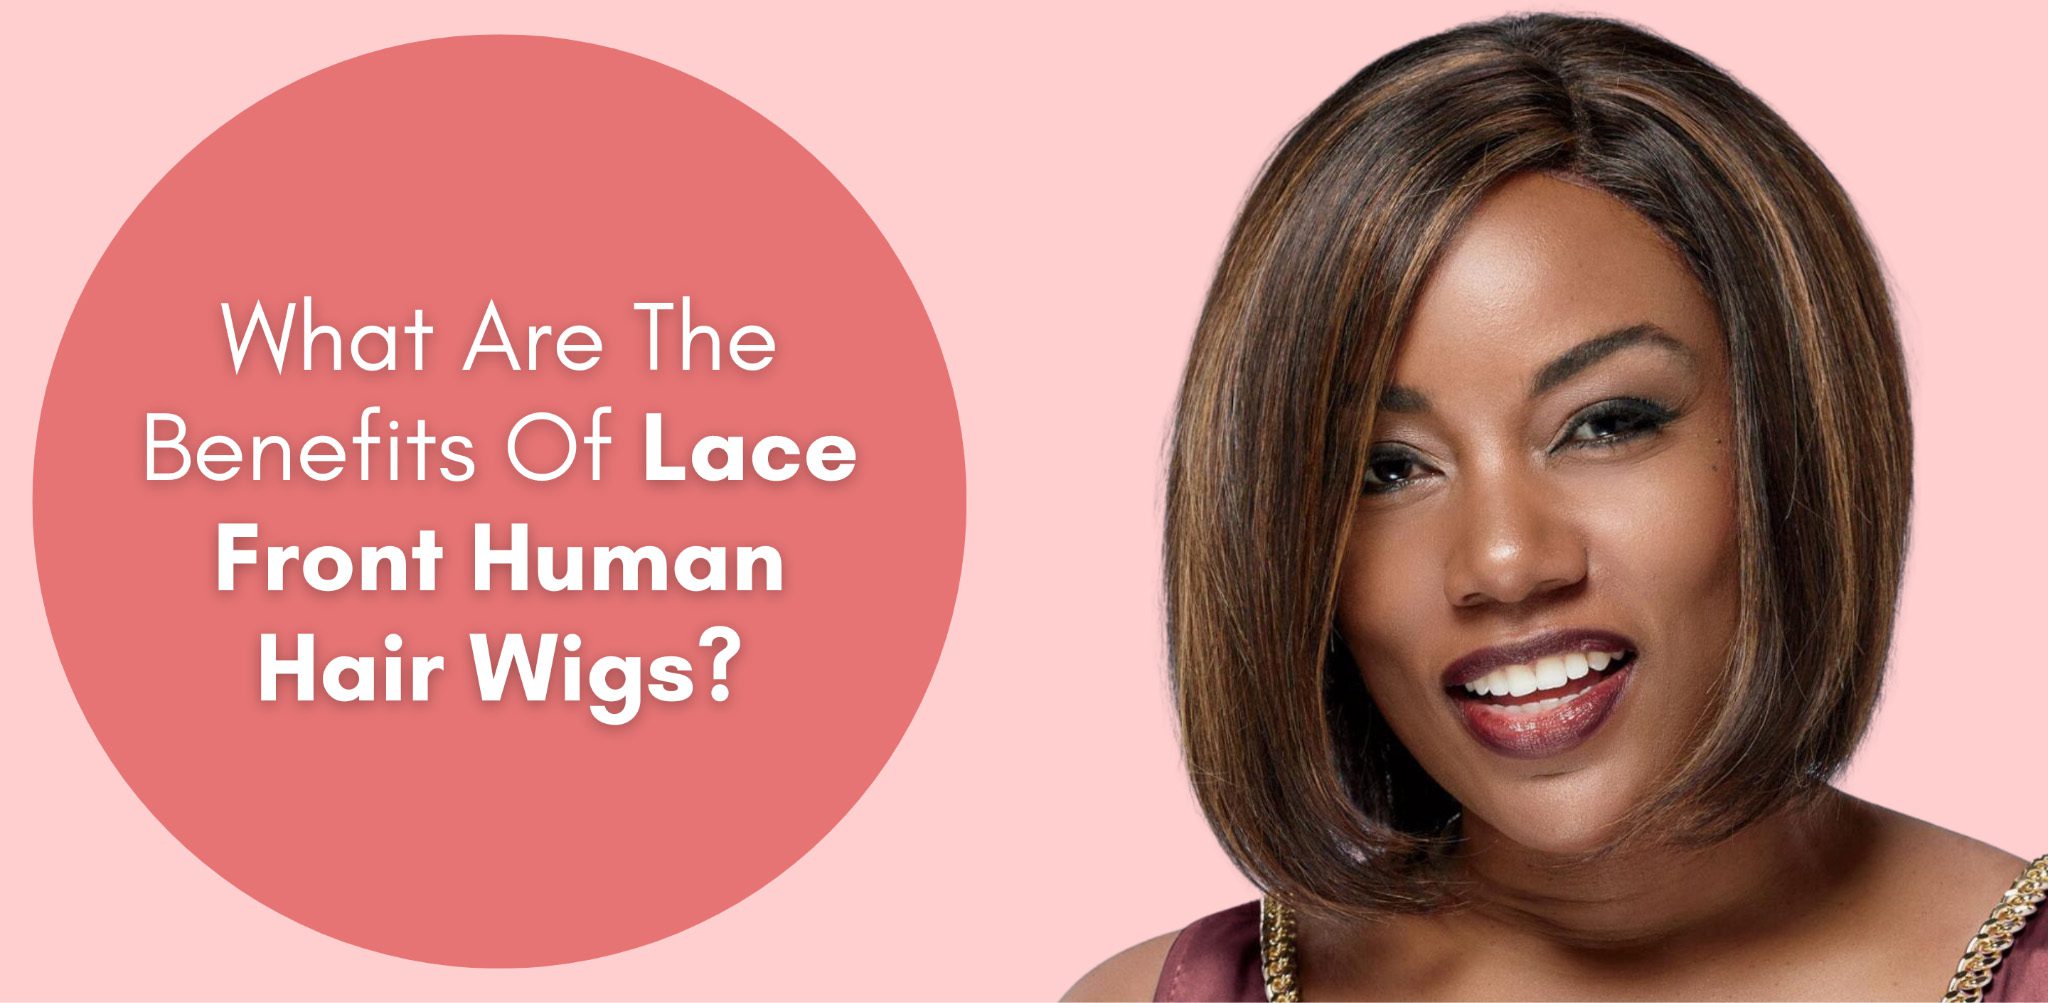 What Are The Benefits Of Lace Front Human Hair Wigs?